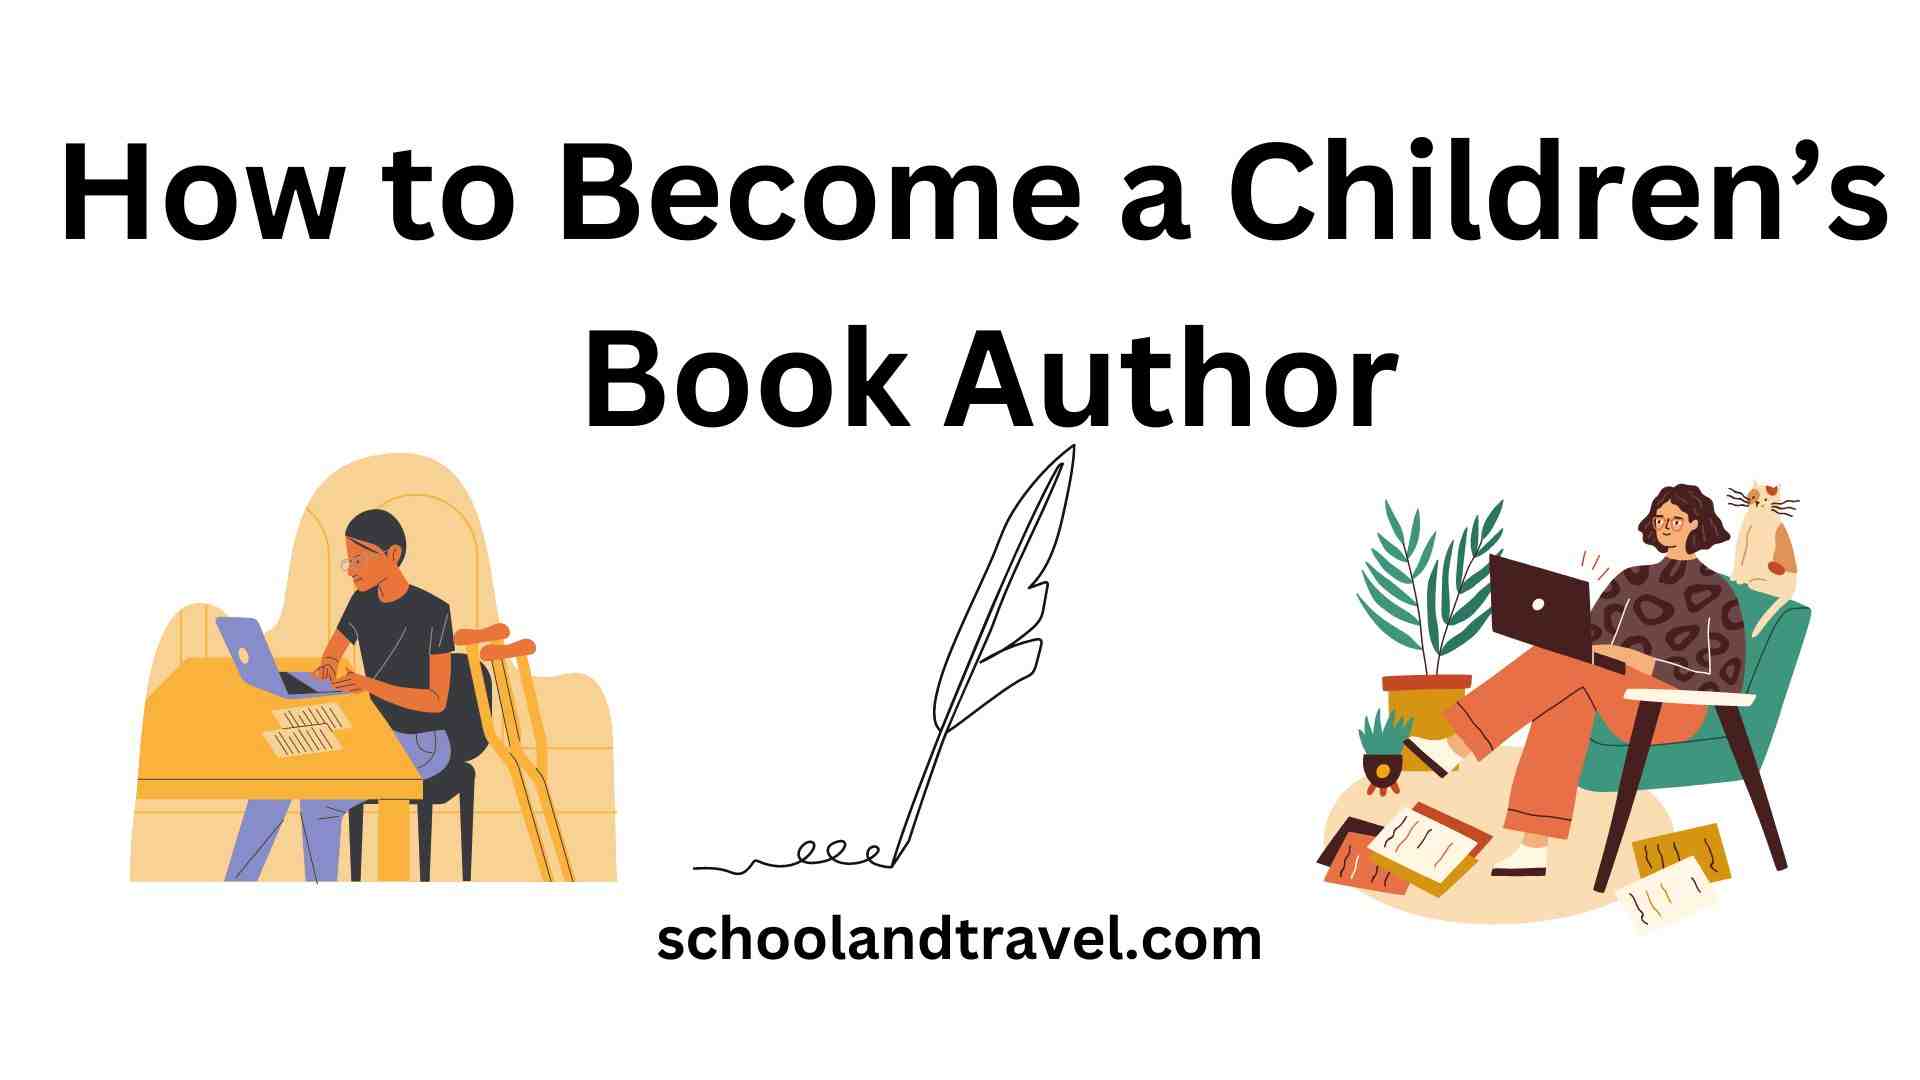 Becoming a Children's Book Author